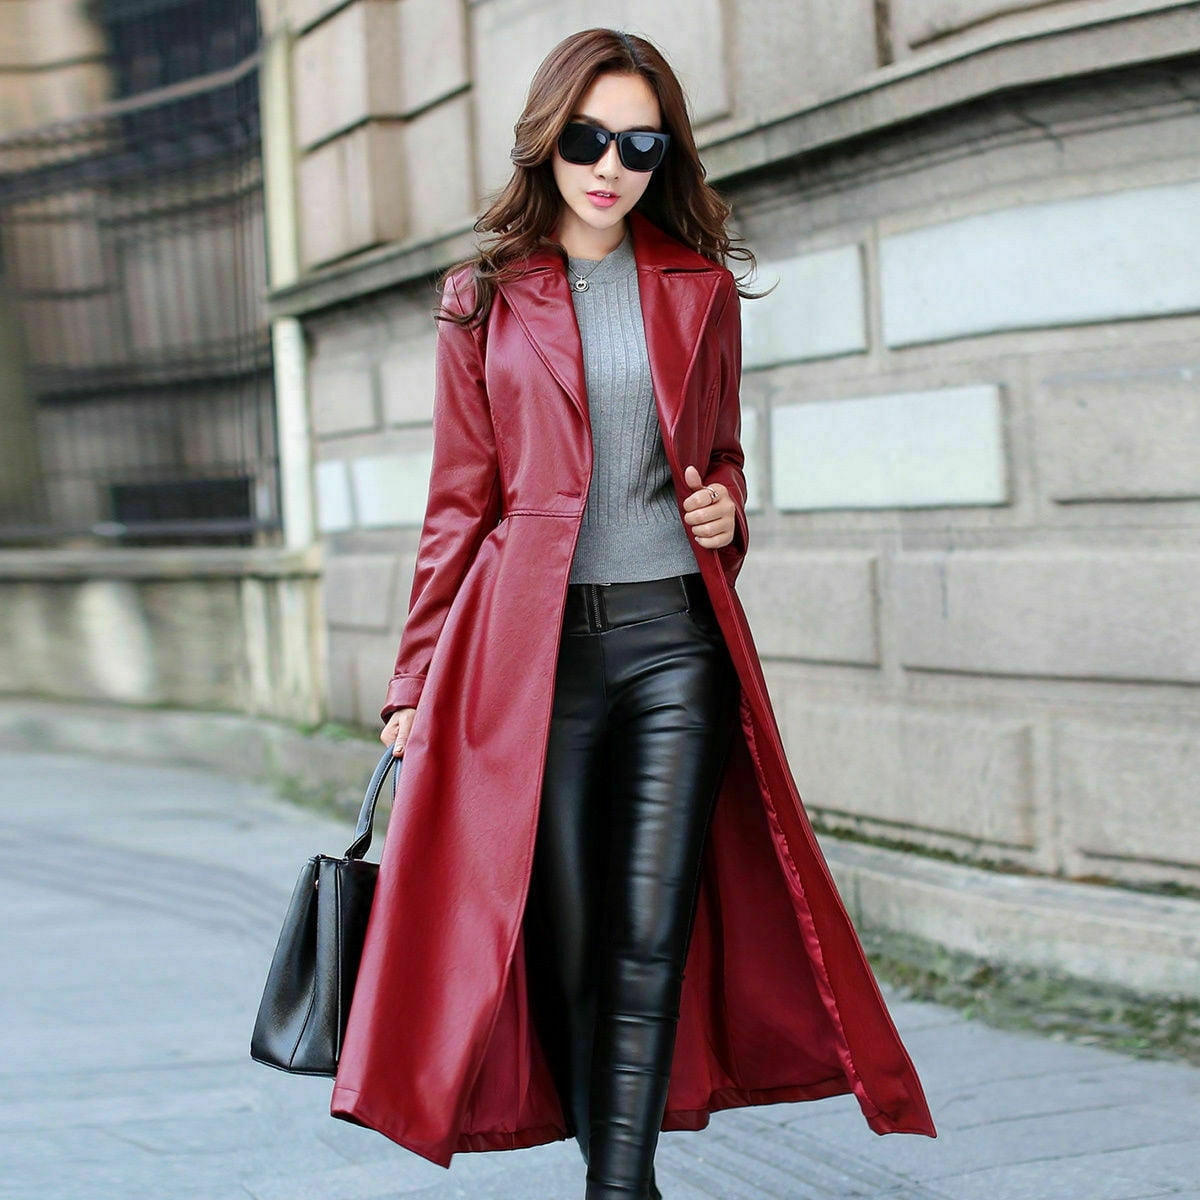 Noora Women's Stylish Lambskin Leather Red Color Trench Coat